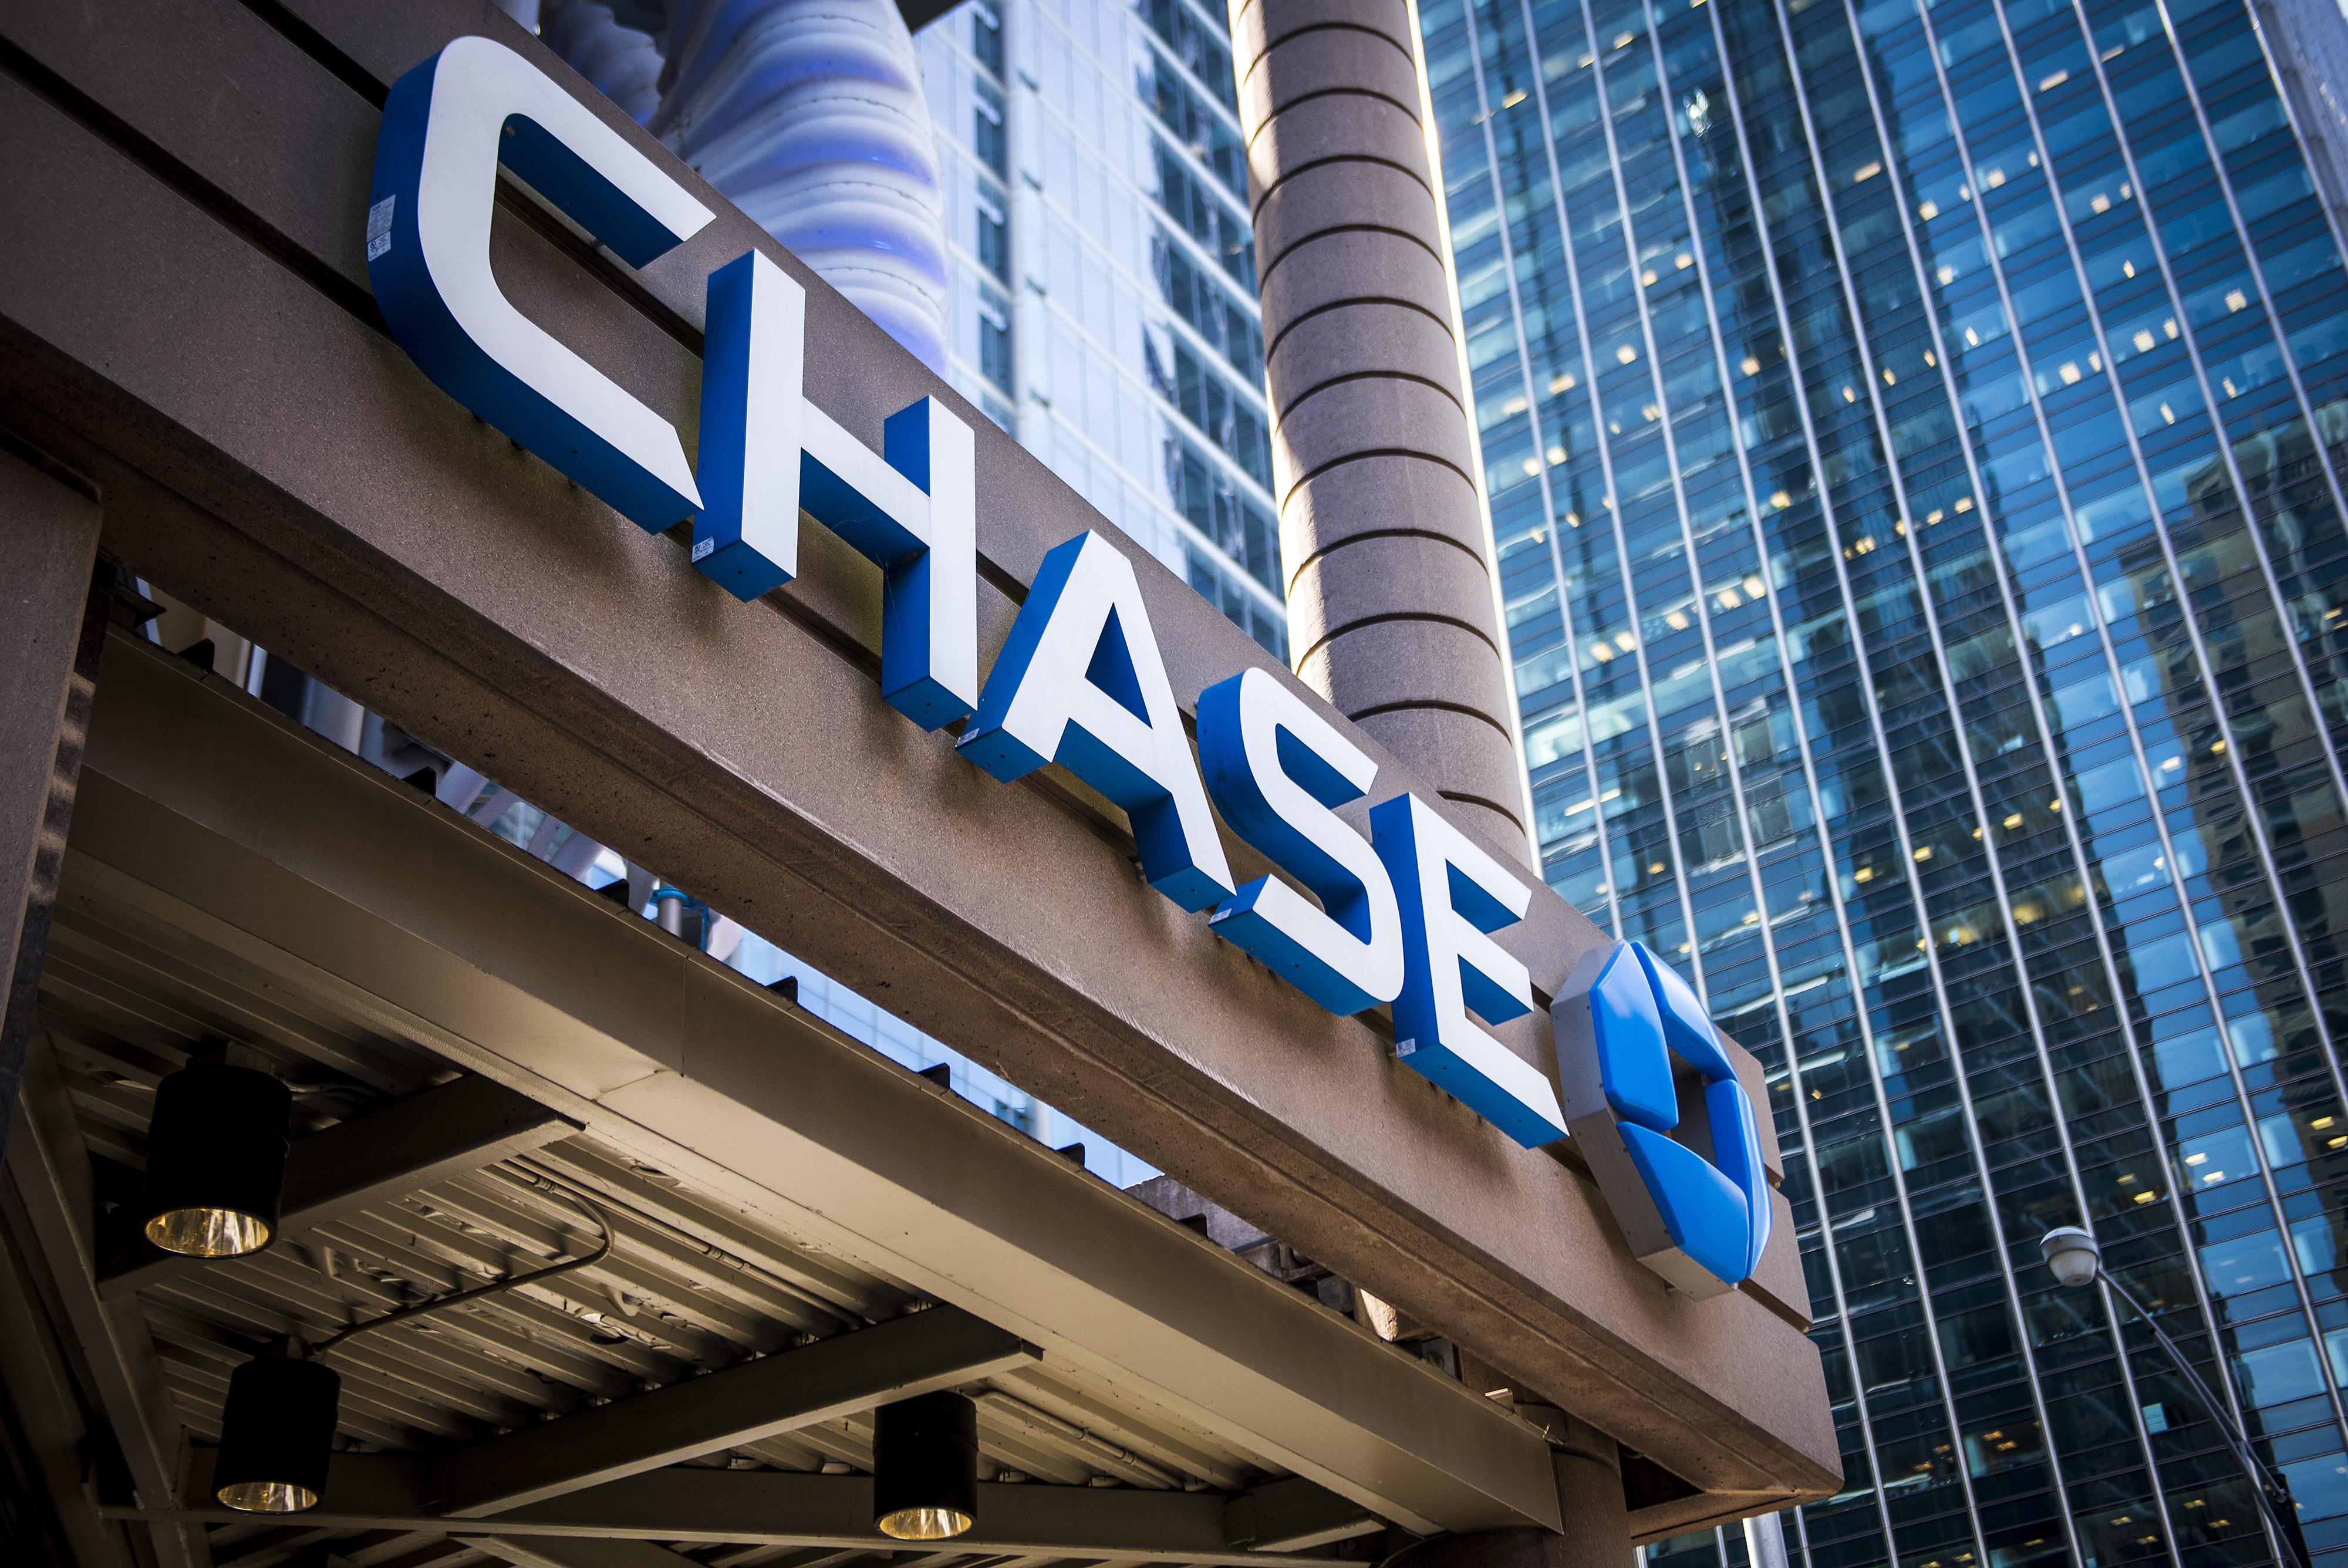 Signage is displayed outside a JPMorgan Chase & Co. bank branch stands in Chicago, Illinois, U.S., on Tuesday, July 10, 2017. JPMorgan Chase & Co. is scheduled to release earnings figures on July 13. Photographer: Christopher Dilts/Bloomberg